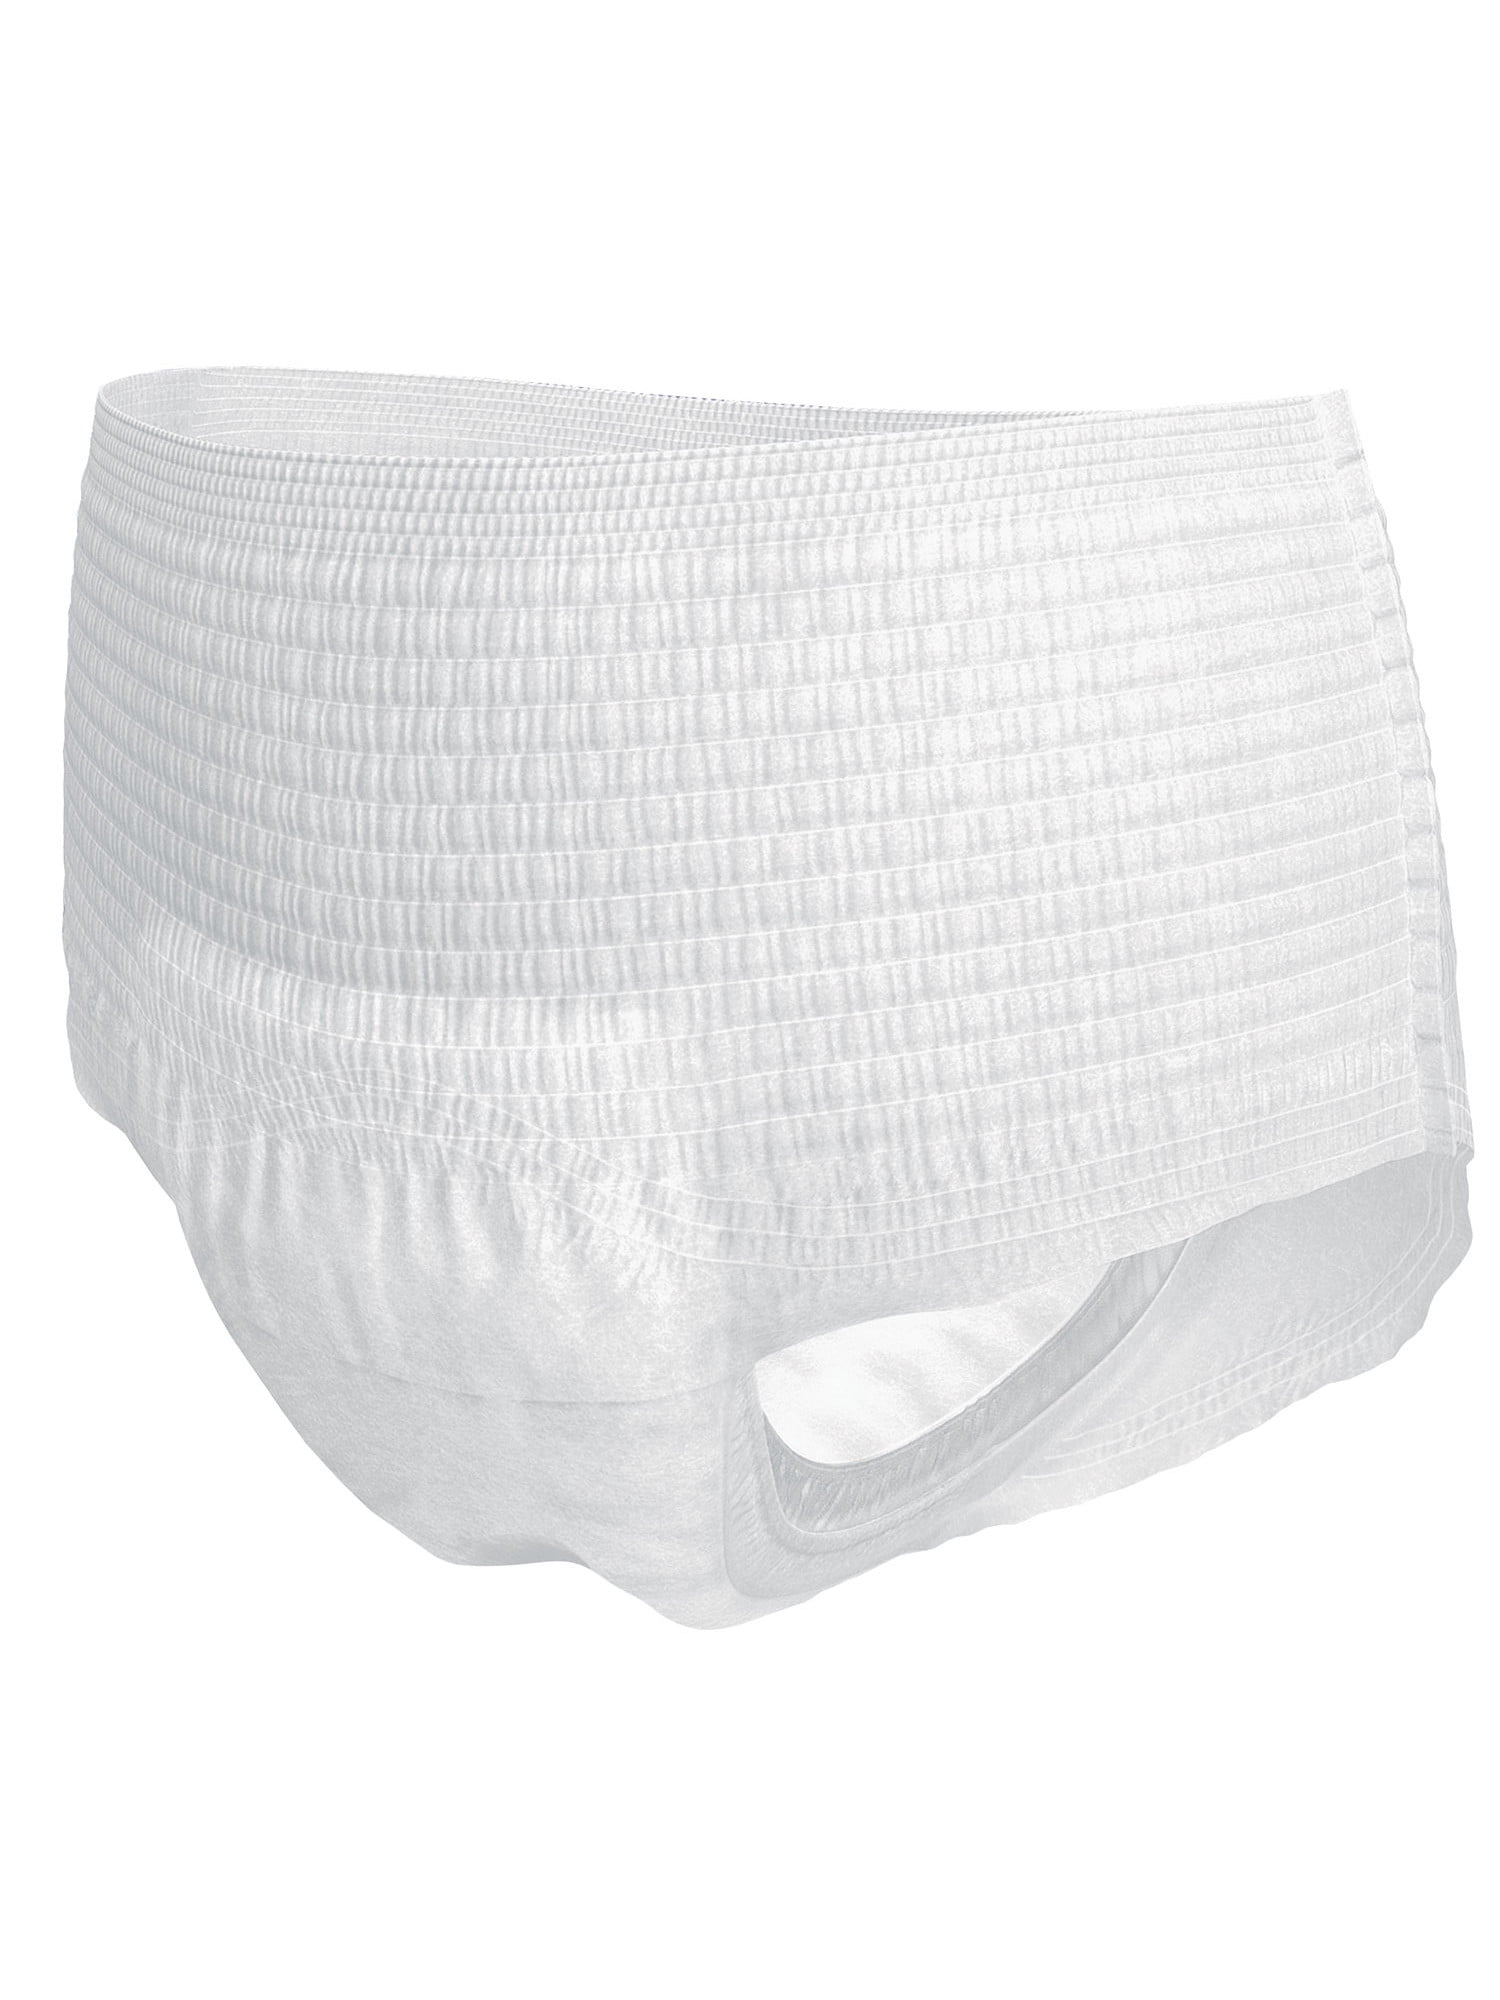 Tena Overnight Super Disposable Pull-On Underpants - Incontinence ...